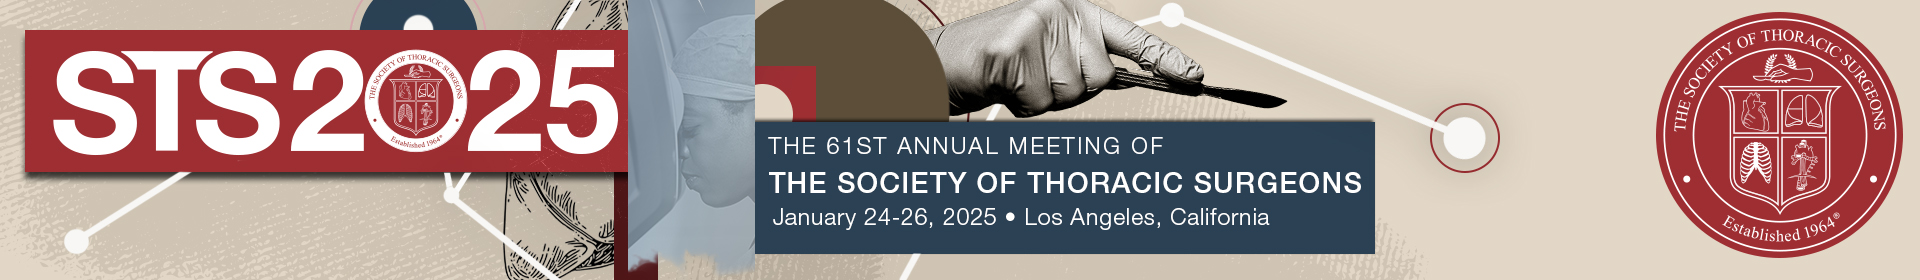 STS 2025 Annual Meeting Event Banner